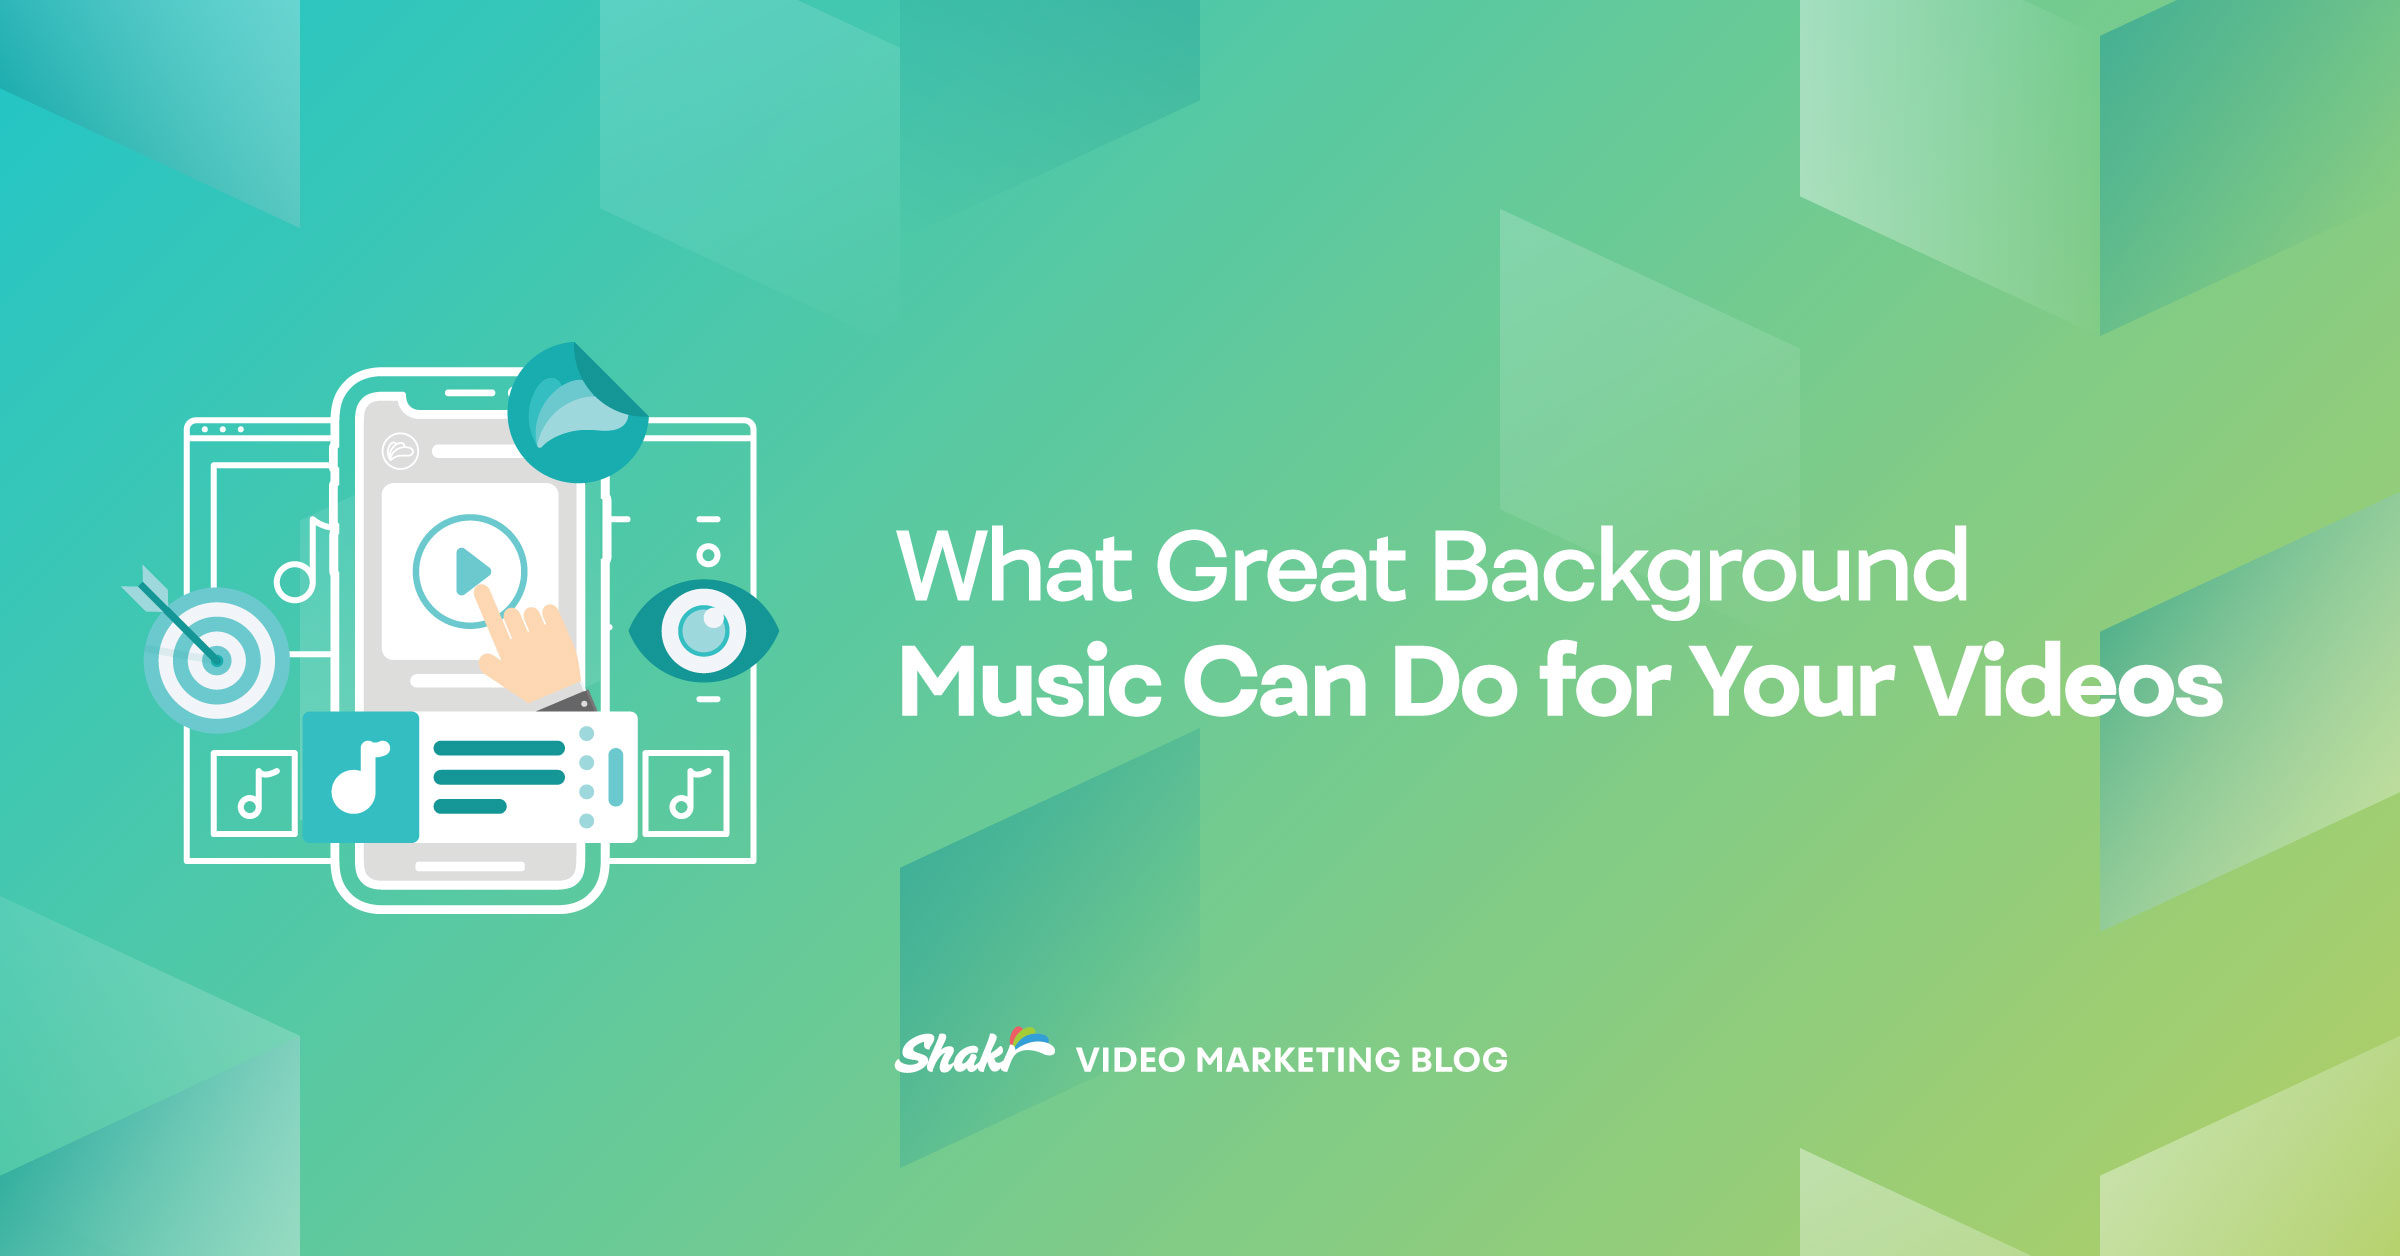 What Great Background Music Can Do for Your Videos - Shakr